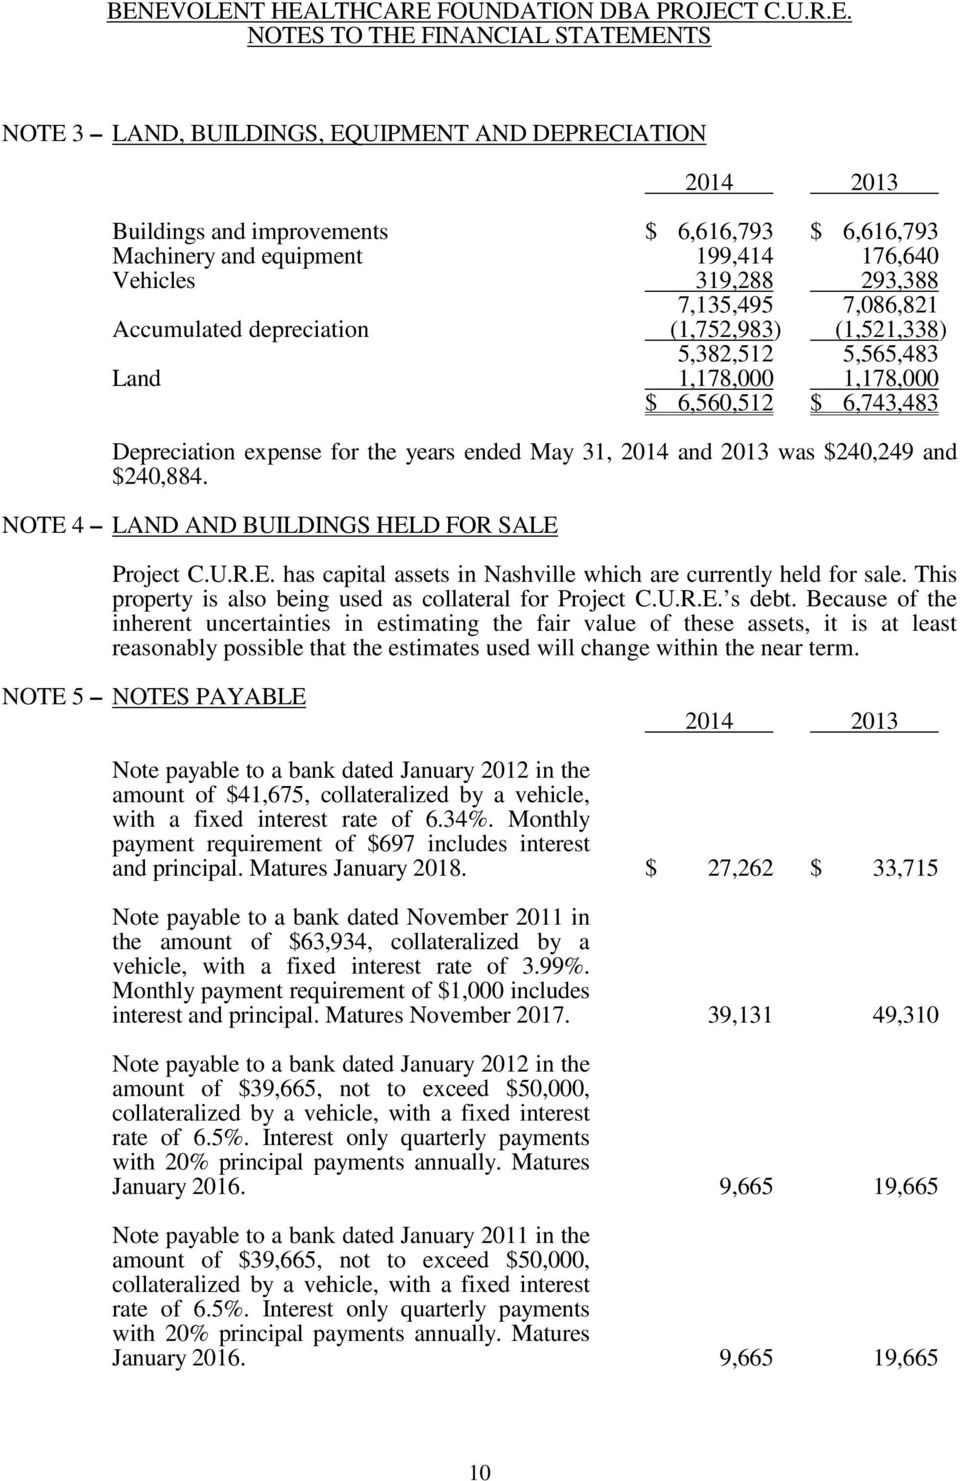 31, 2014 and 2013 was $240,249 and $240,884. NOTE 4 LAND AND BUILDINGS HELD FOR SALE Project C.U.R.E. has capital assets in Nashville which are currently held for sale.